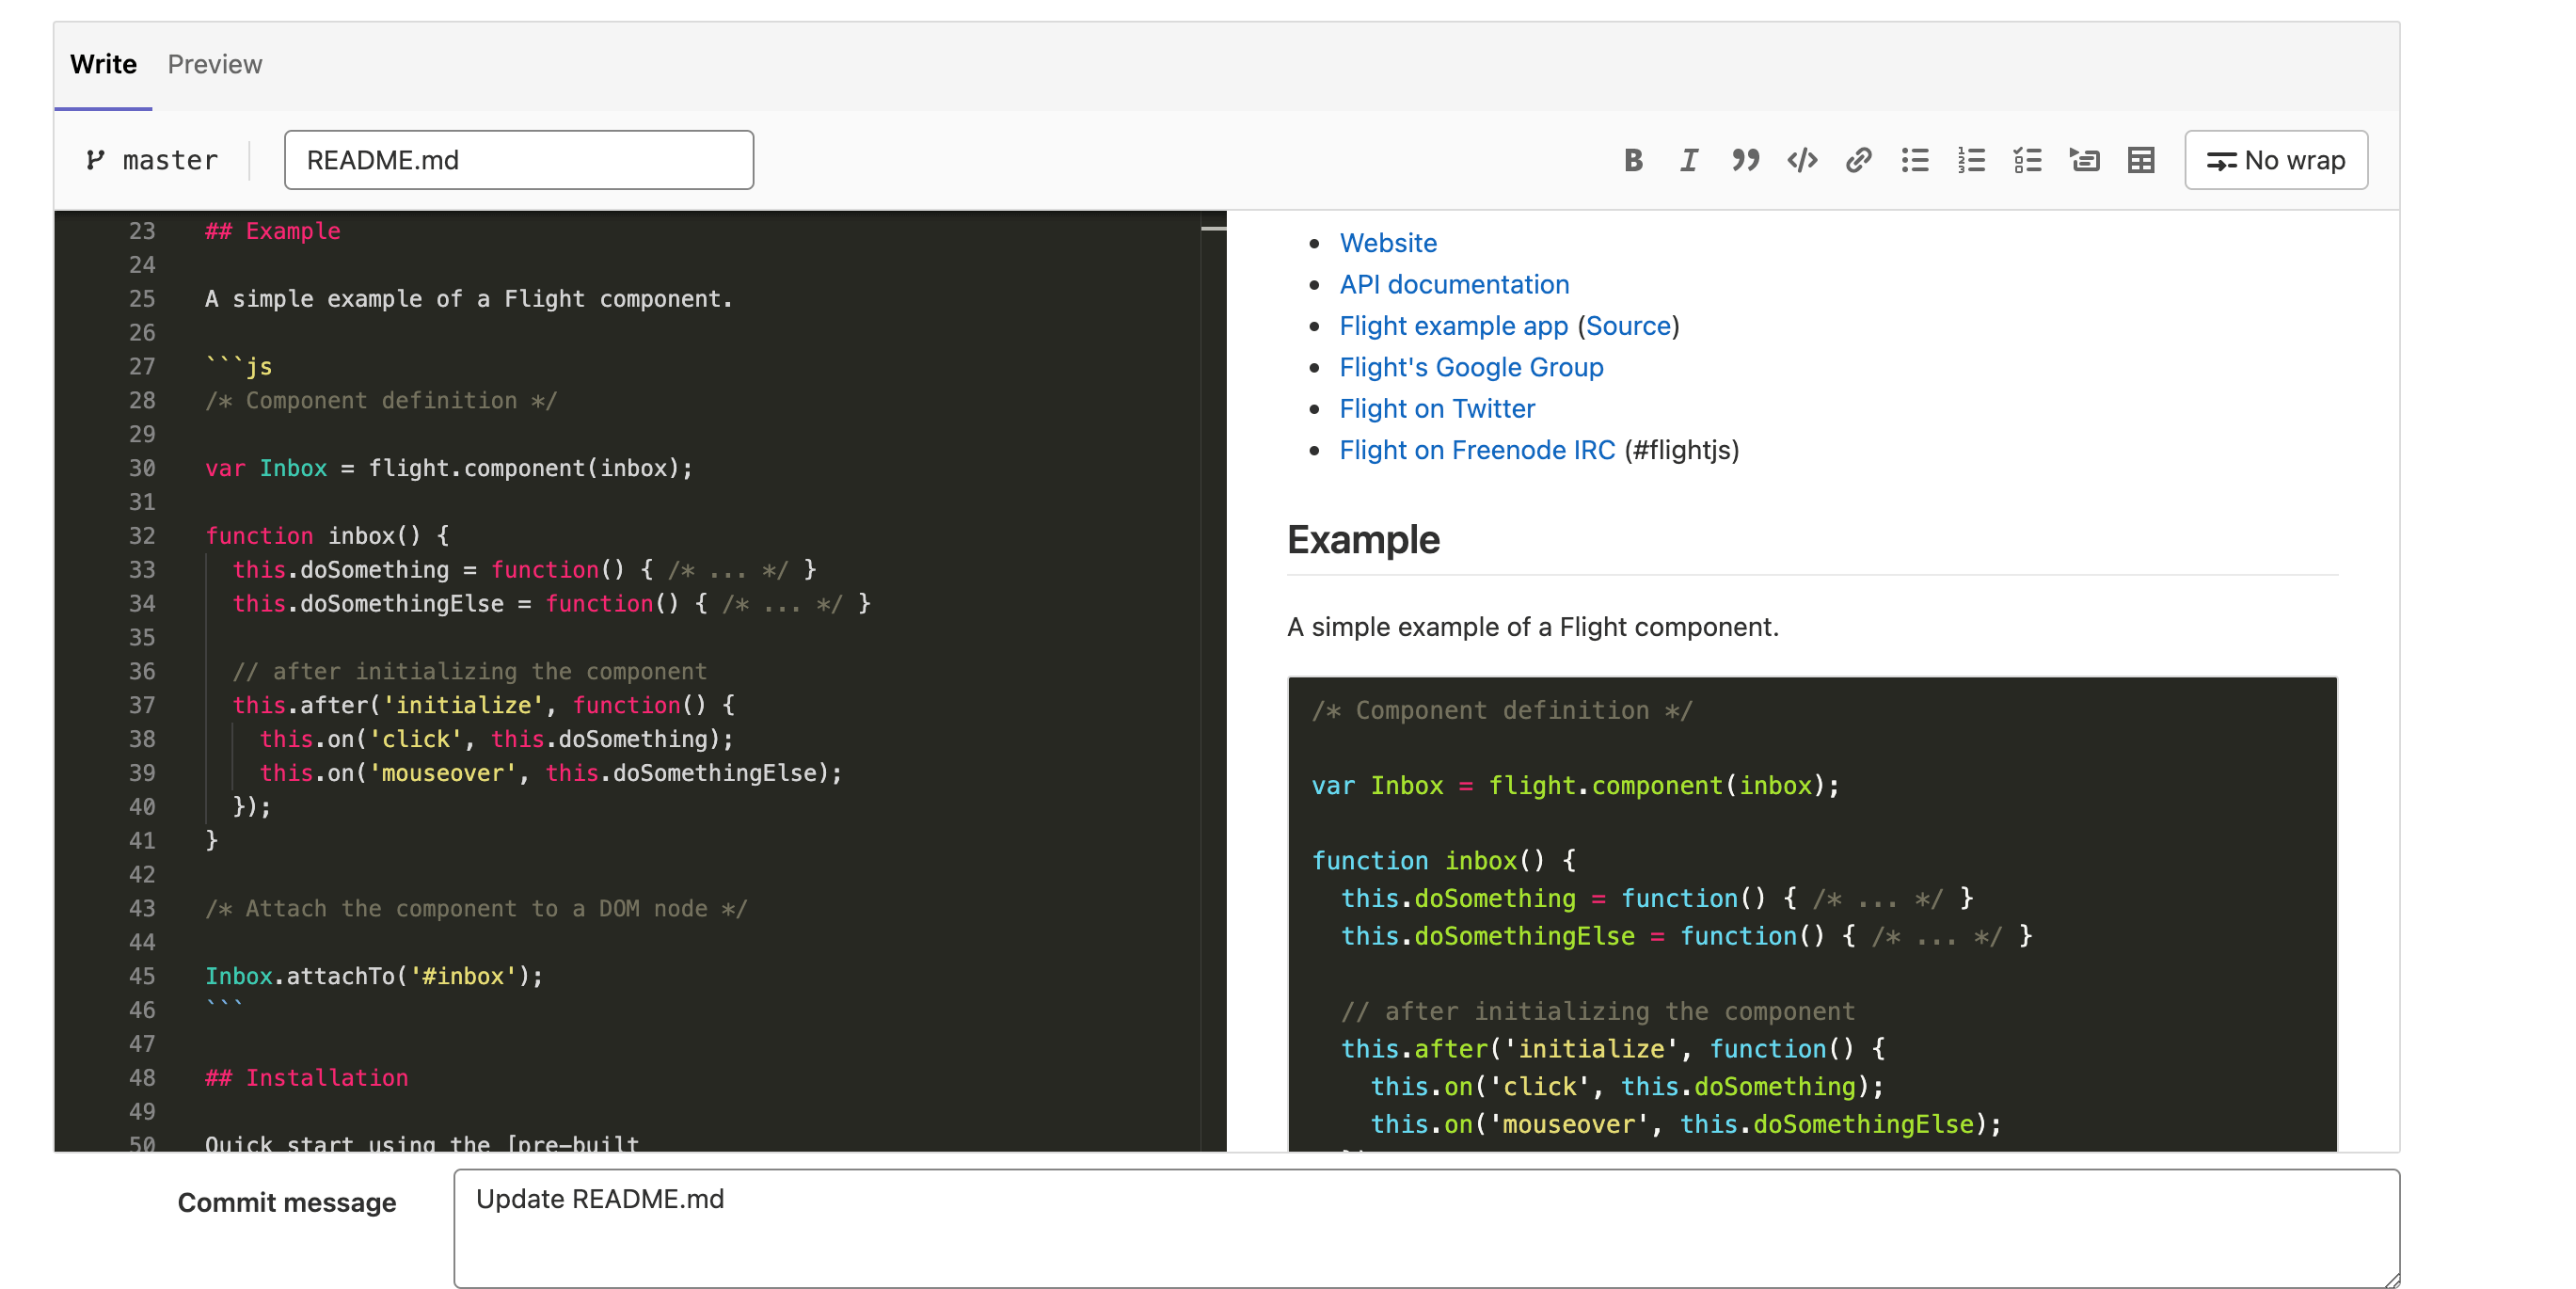 Preview Markdown live while editing